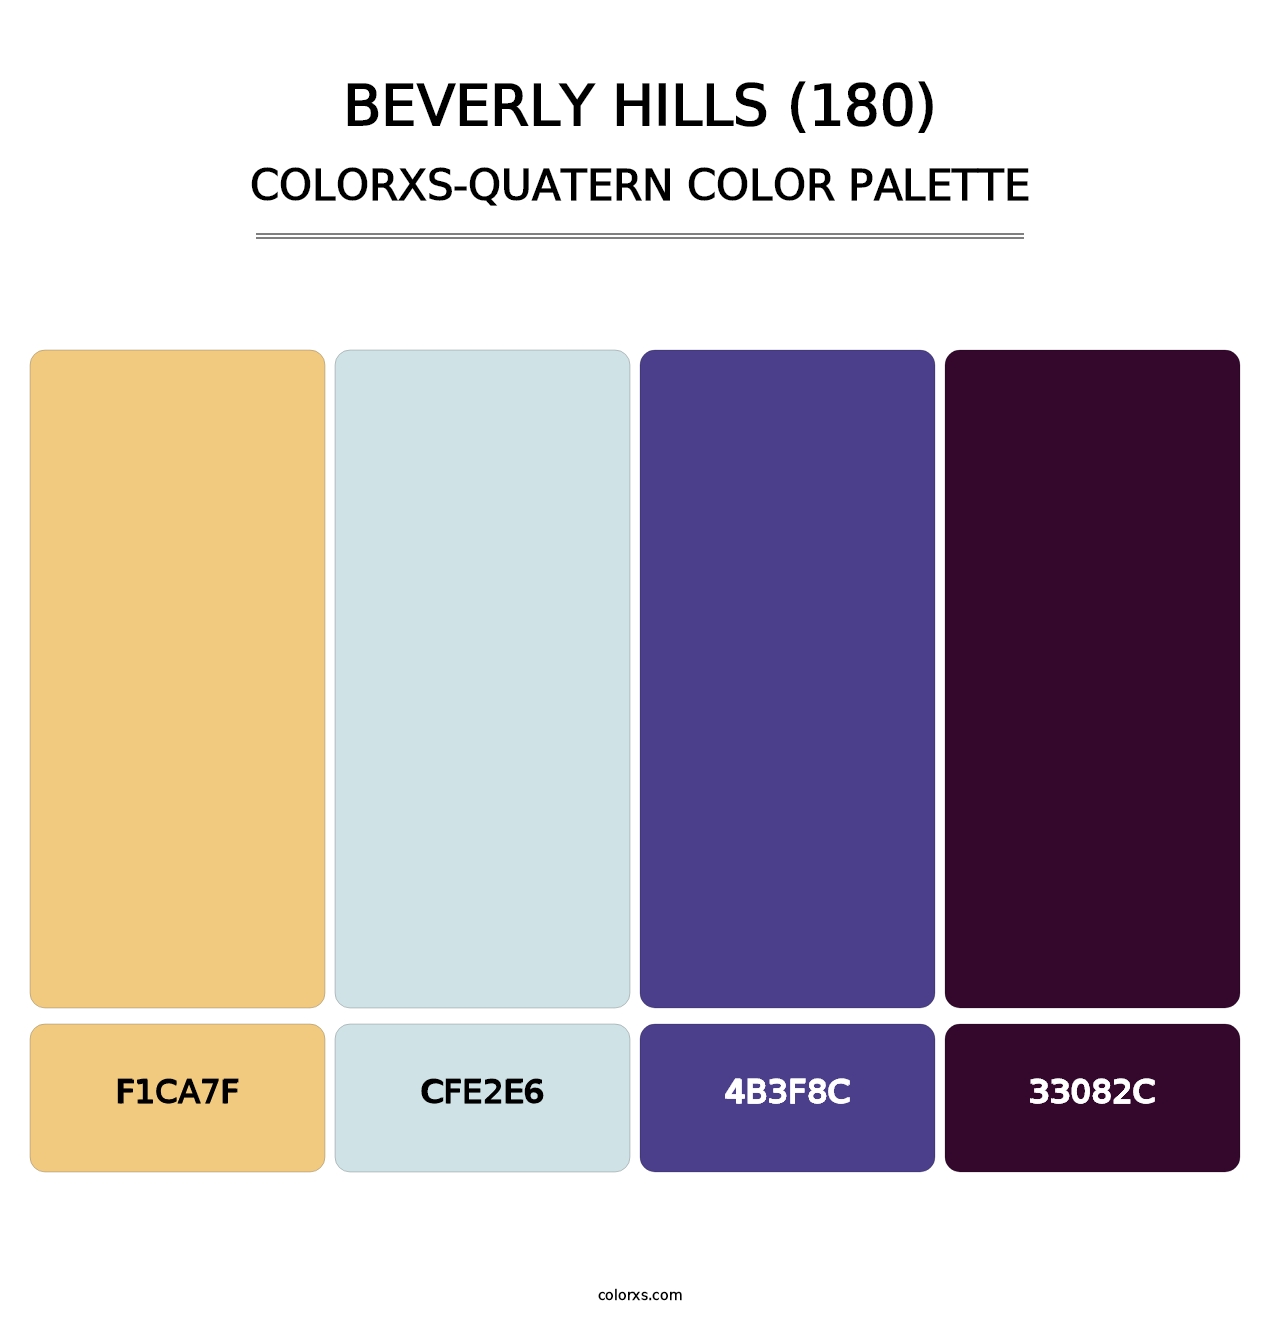 Beverly Hills (180) - Colorxs Quatern Palette